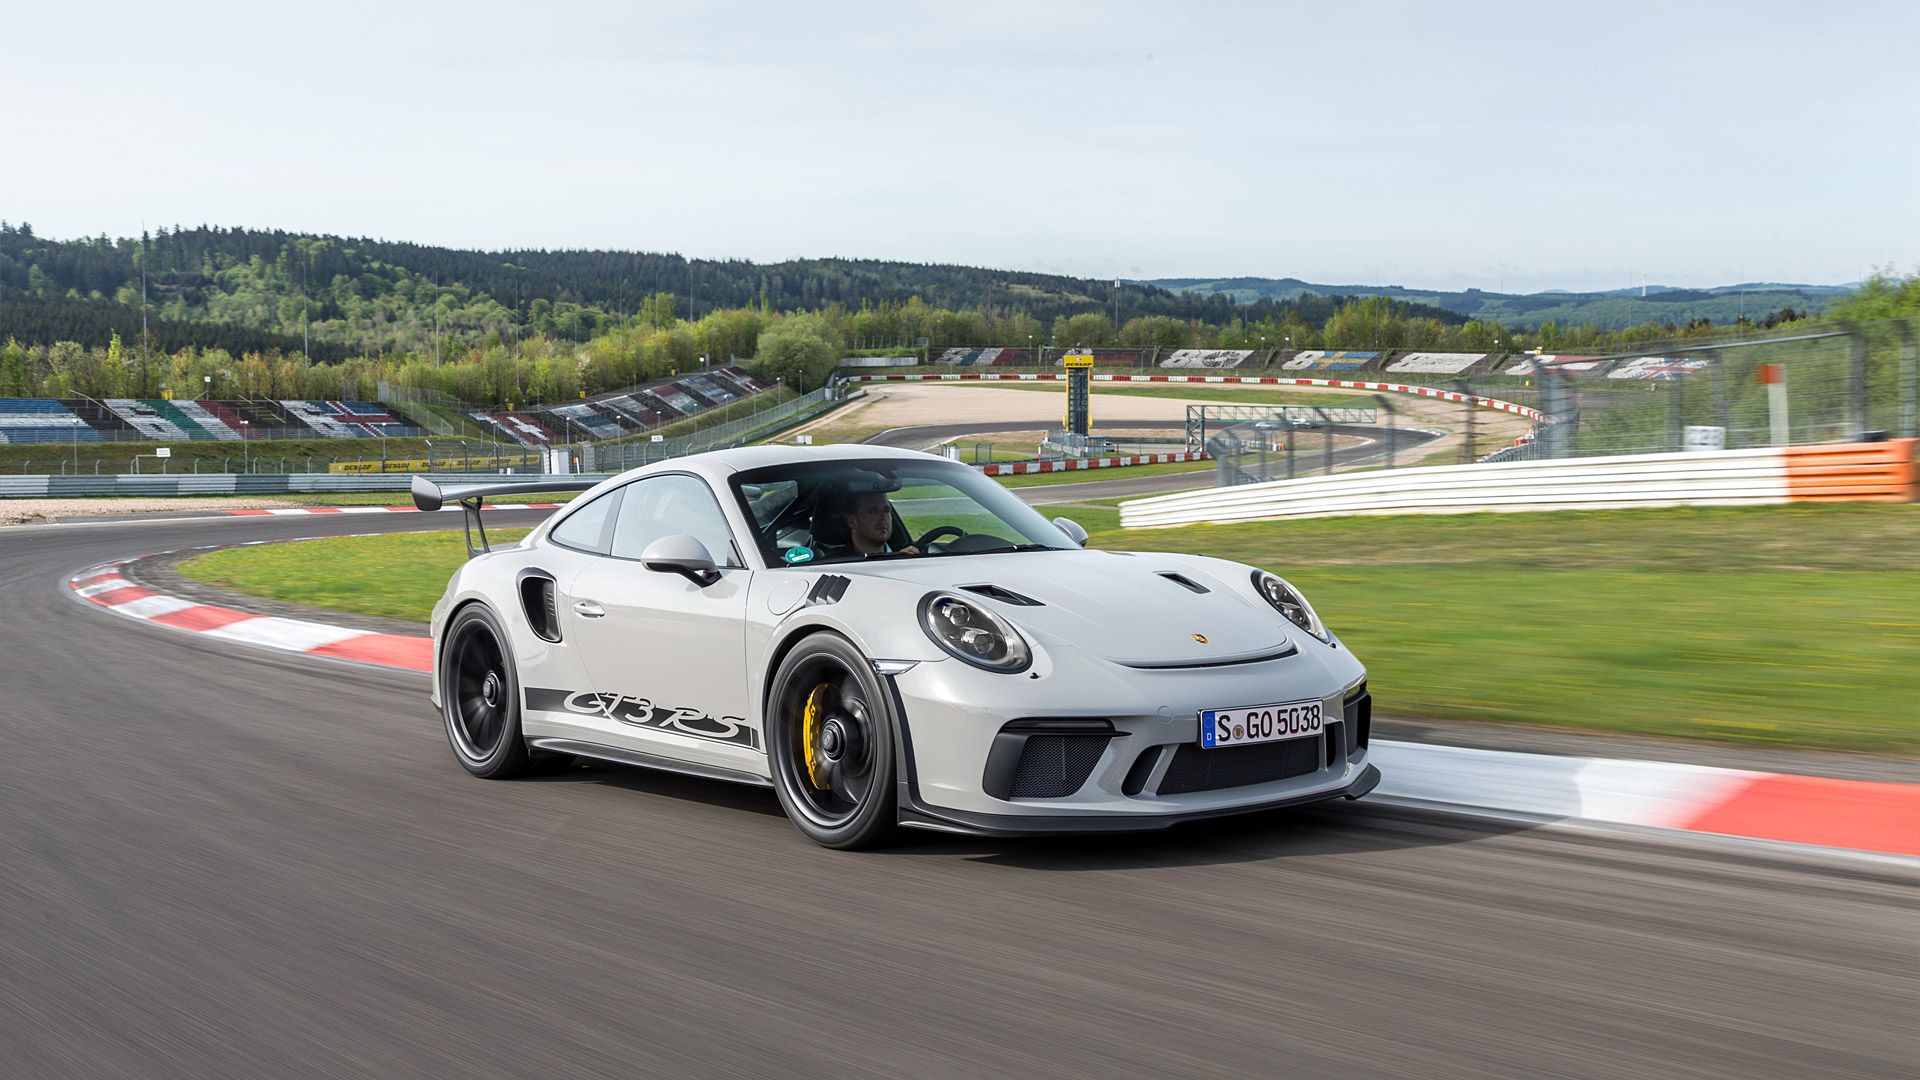 Born from Racing: the New 2019 Porsche 911 GT3 RS